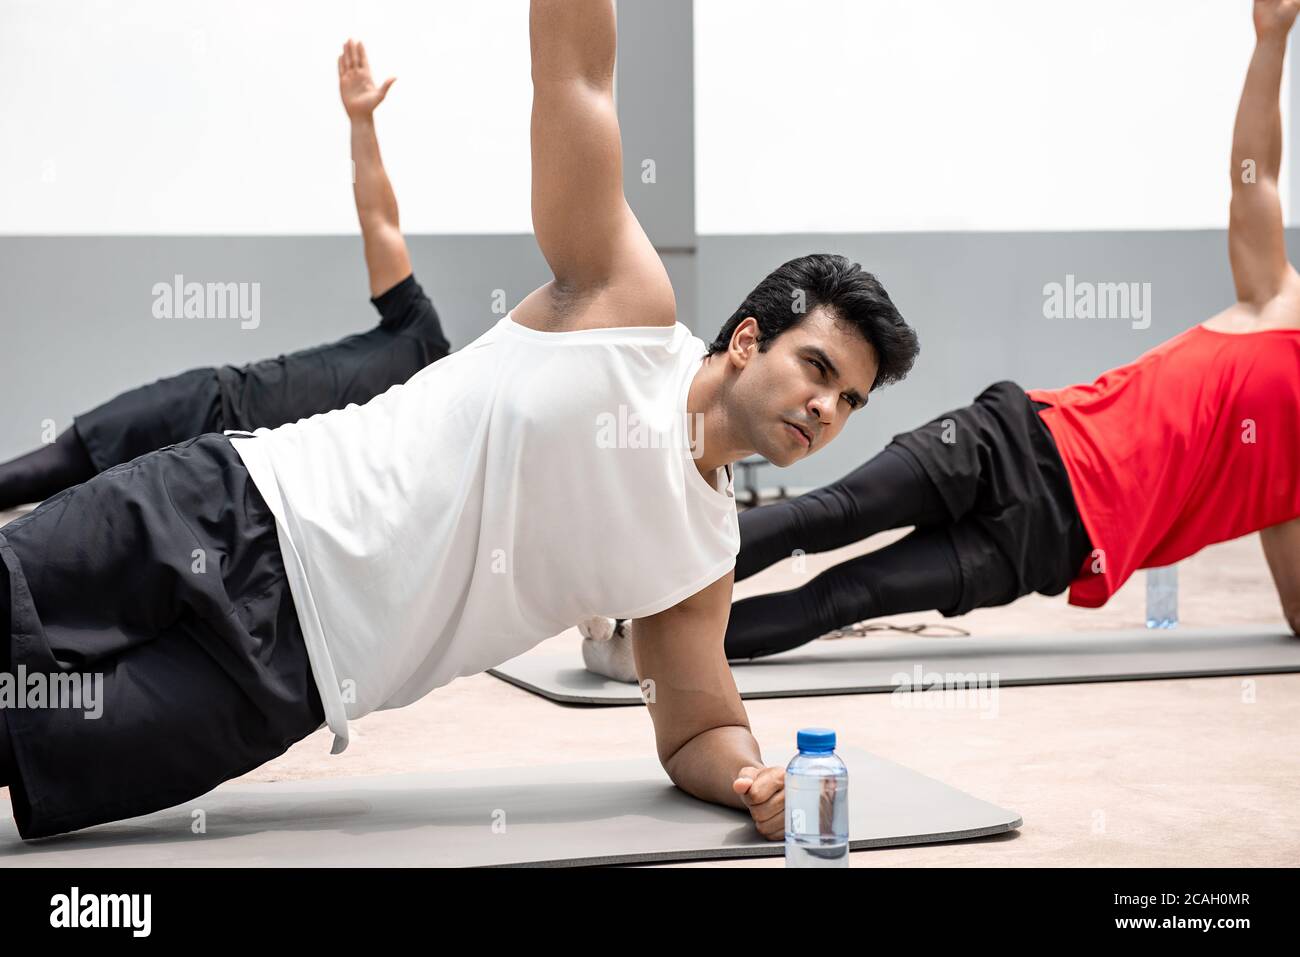 Athletic Indian man doing side plank exercise outdoors on rooftop with friends Stock Photo